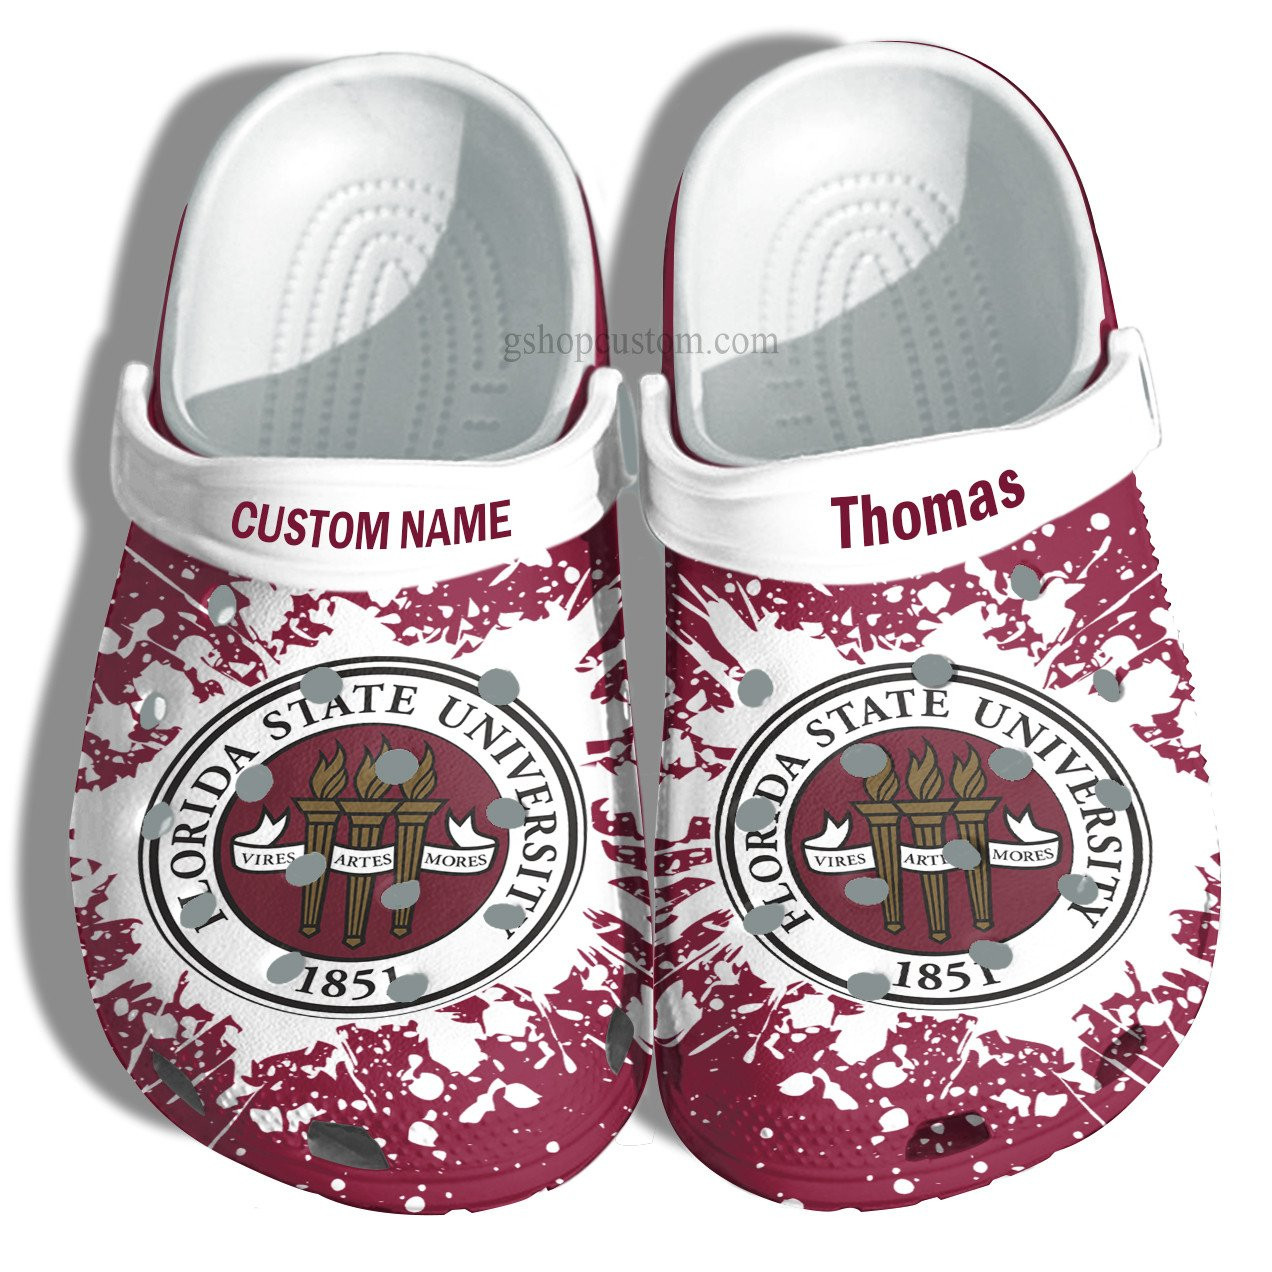 Florida State University Graduation Gifts Croc Shoes Customize- Admission Gift Crocs Shoes